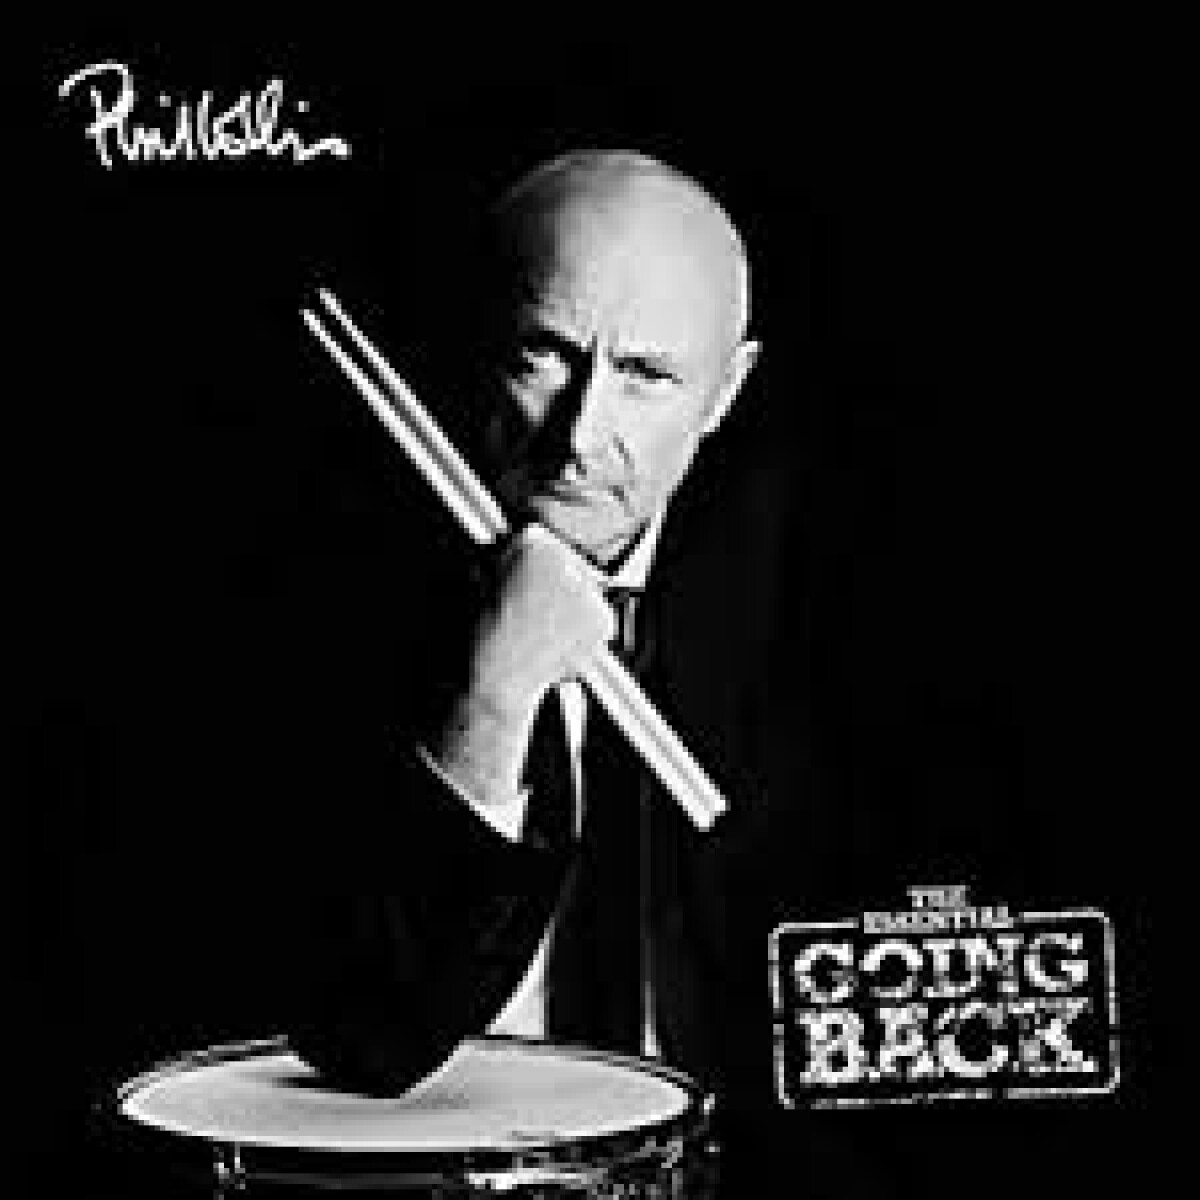 Phil Collins The Essential Going Back - Vinilo 